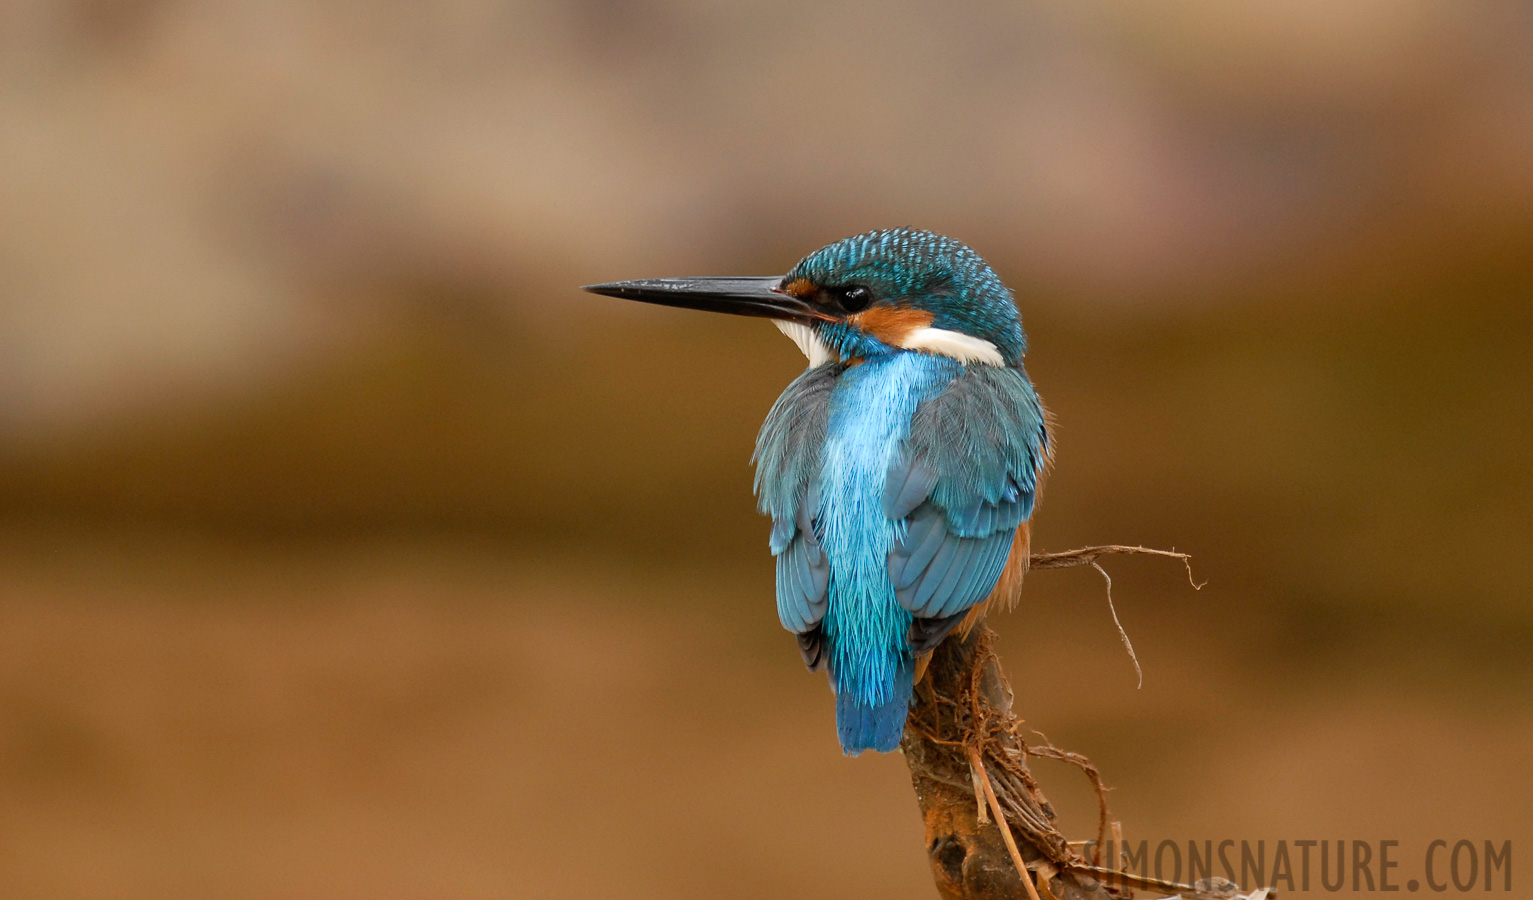 Alcedo atthis bengalensis [400 mm, 1/90 sec at f / 4.5, ISO 400]